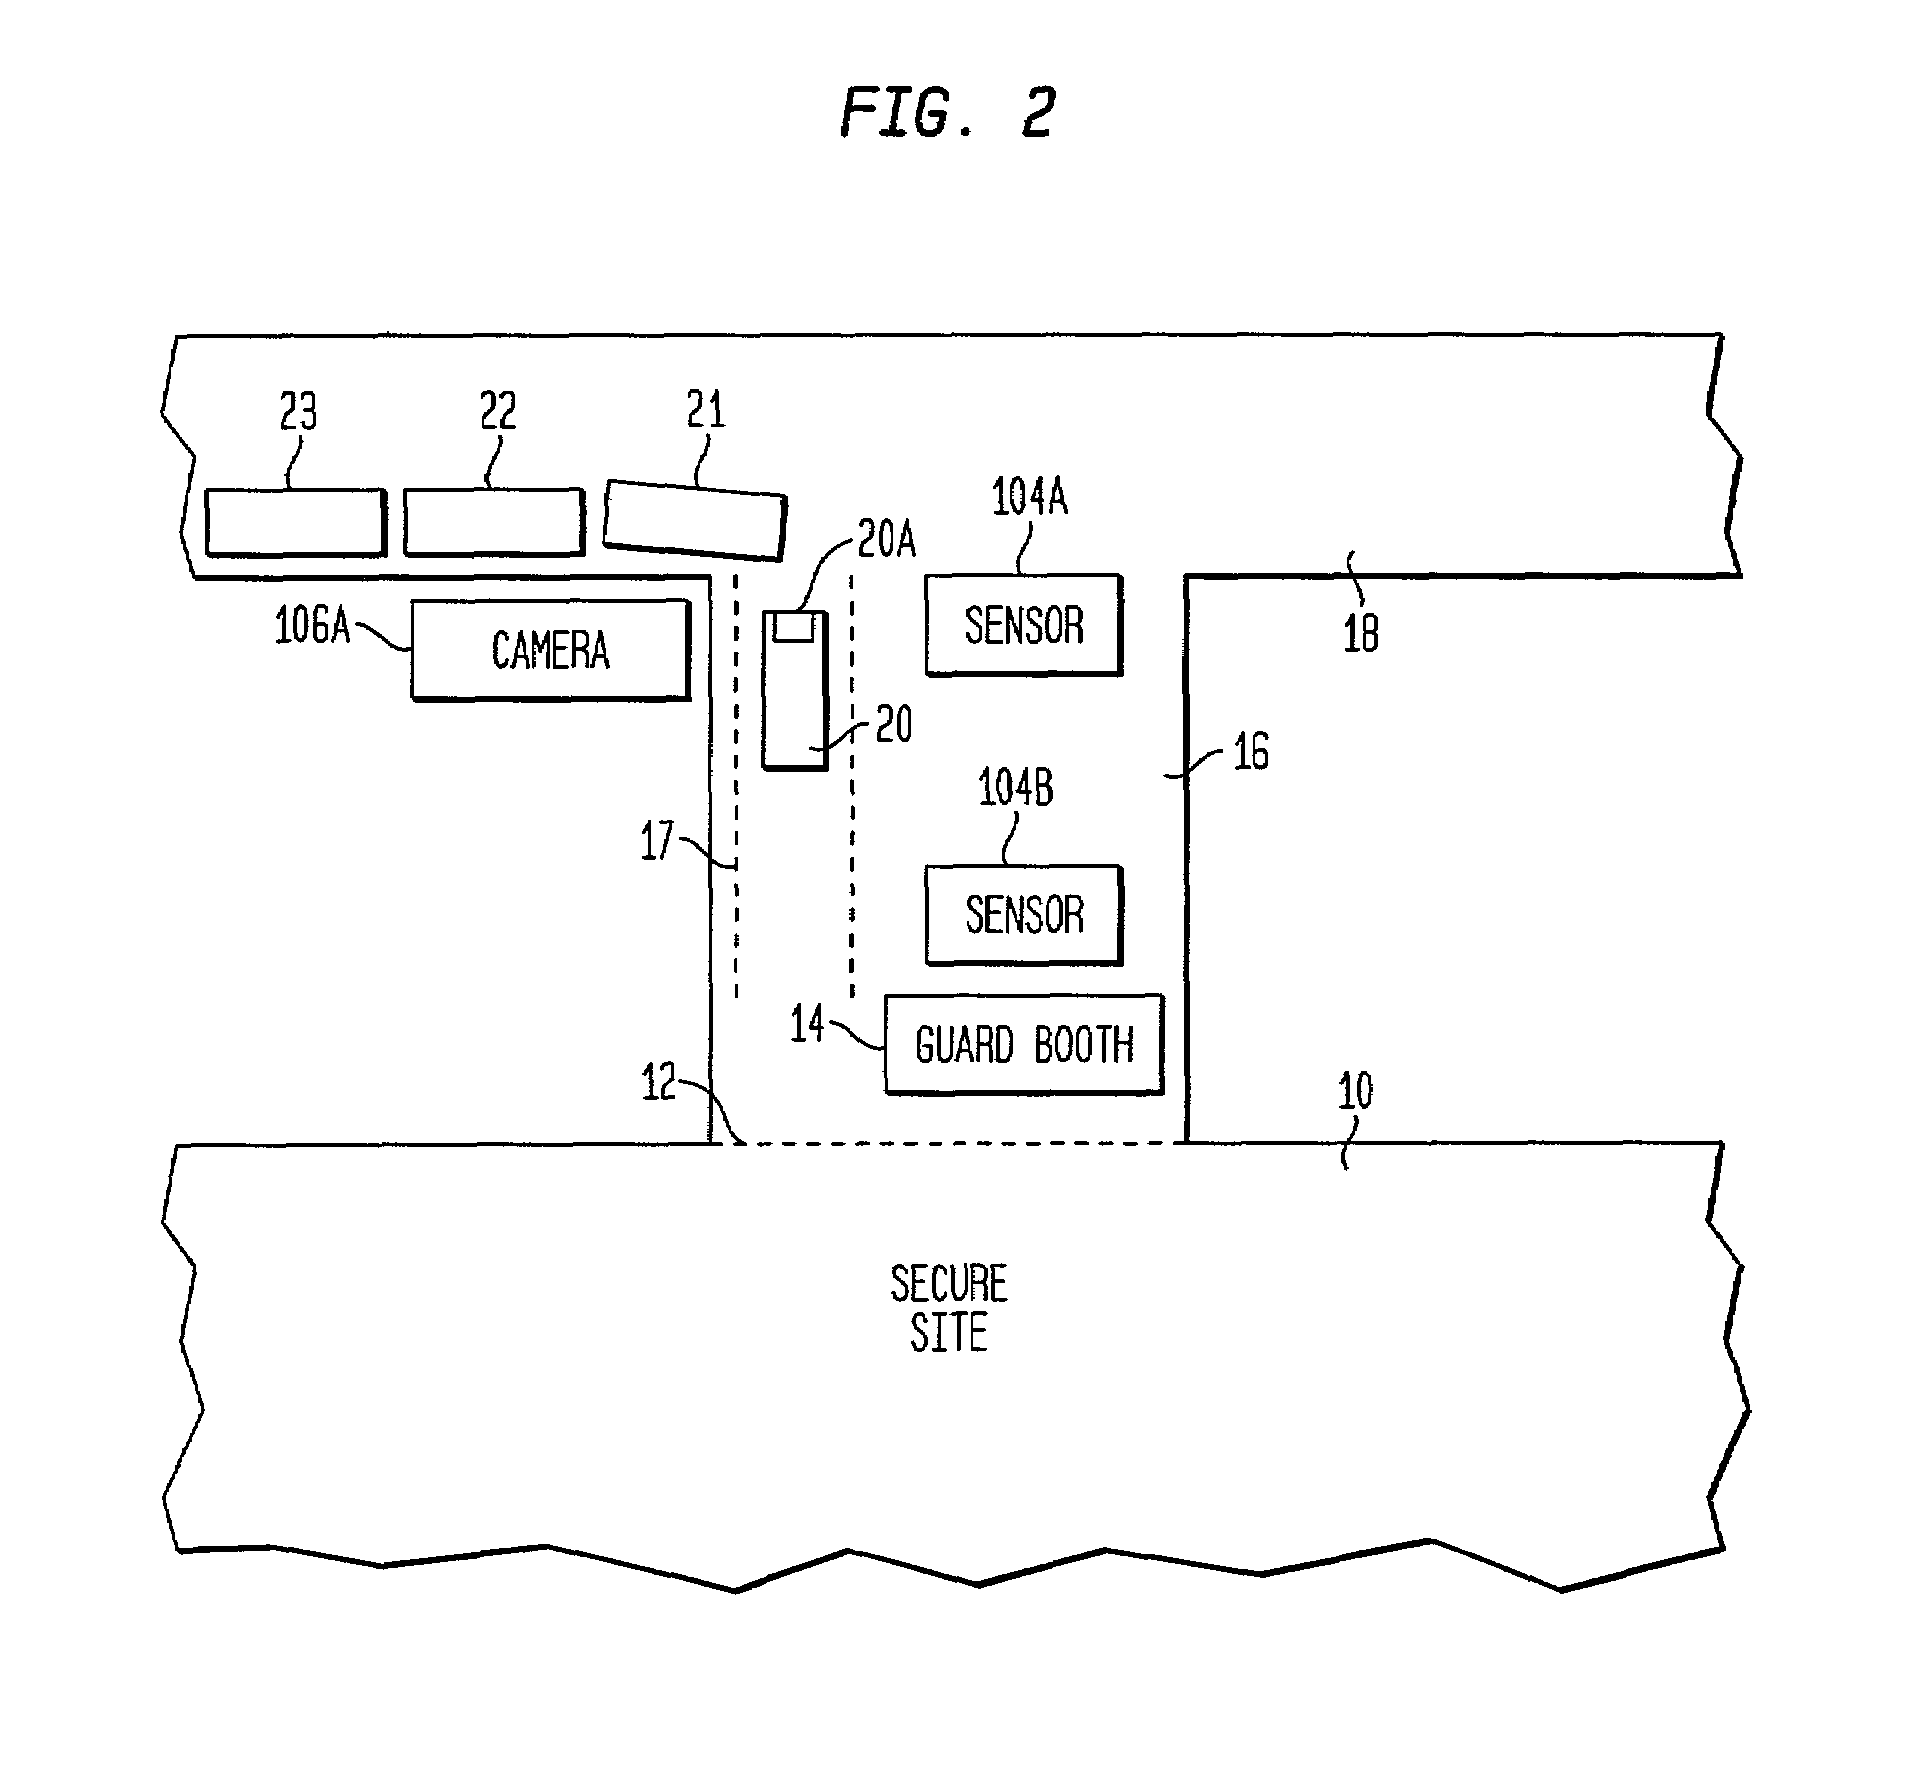 Automatic vehicle information retrieval for use at entry to a secure site